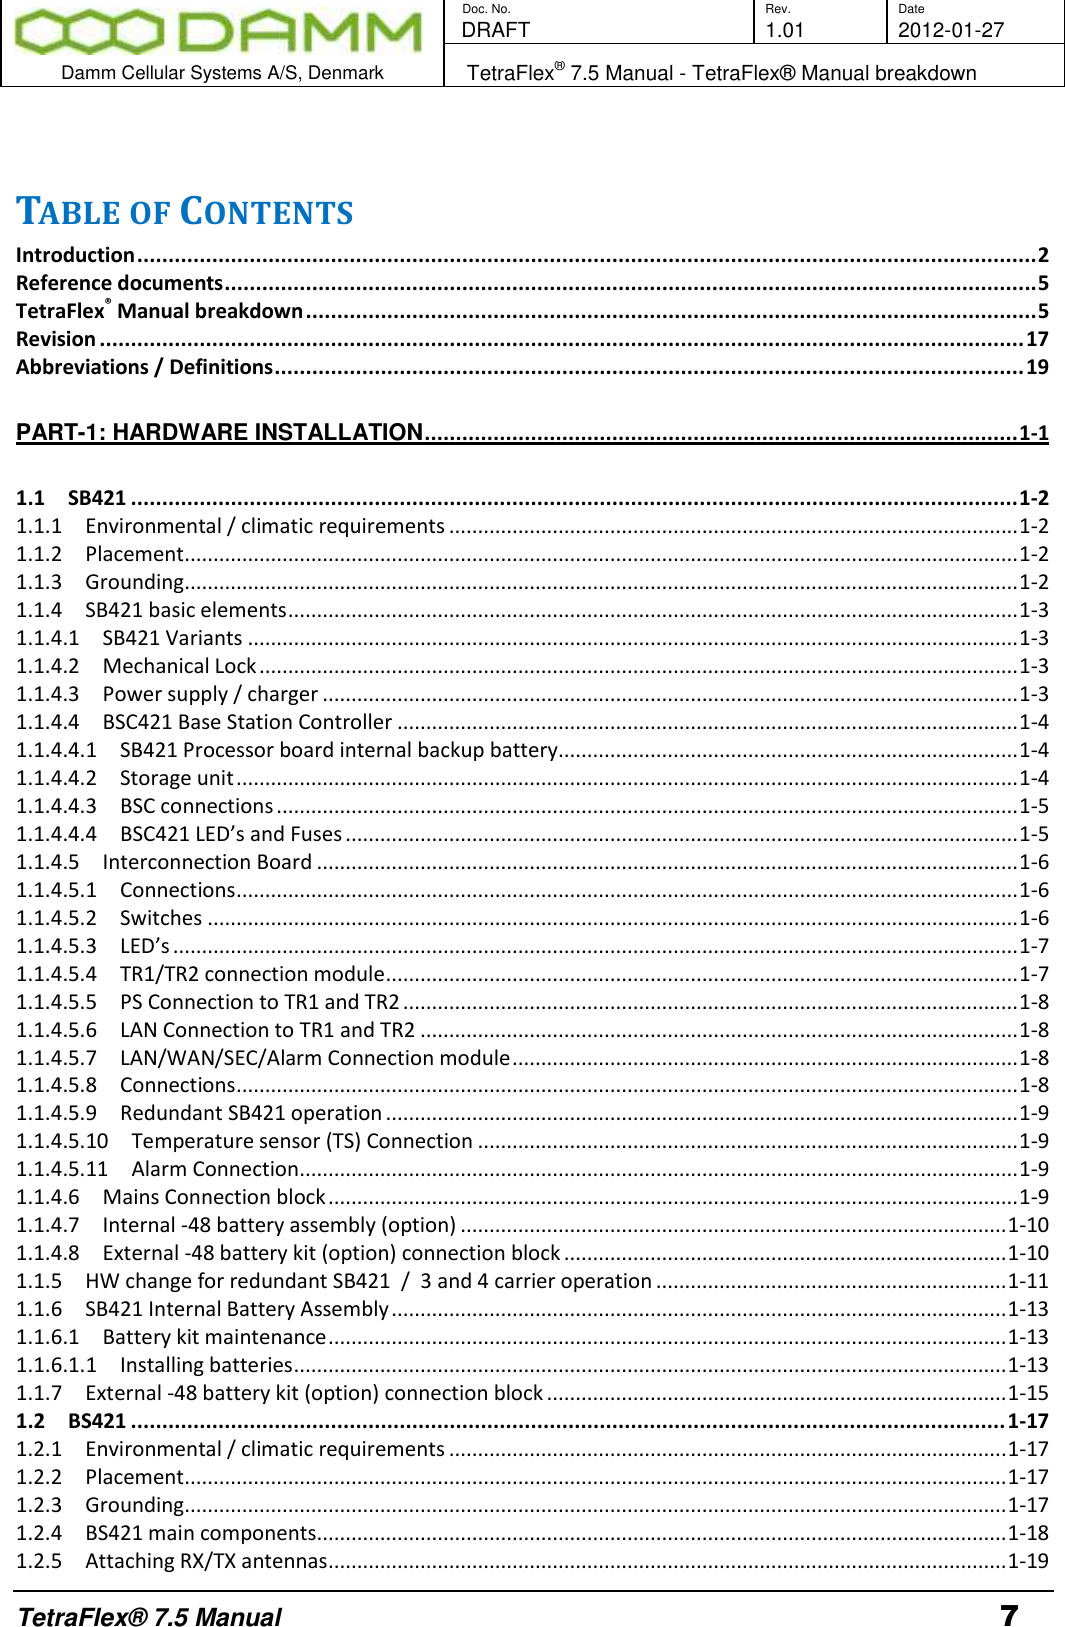        Doc. No. Rev. Date    DRAFT  1.01 2012-01-27  Damm Cellular Systems A/S, Denmark   TetraFlex® 7.5 Manual - TetraFlex® Manual breakdown  TetraFlex® 7.5 Manual 7  TABLE OF CONTENTS Introduction ................................................................................................................................................ 2 Reference documents .................................................................................................................................. 5 TetraFlex® Manual breakdown ..................................................................................................................... 5 Revision .................................................................................................................................................... 17 Abbreviations / Definitions ........................................................................................................................ 19 PART-1: HARDWARE INSTALLATION ............................................................................................... 1-1 1.1 SB421 .............................................................................................................................................. 1-2 1.1.1  Environmental / climatic requirements ................................................................................................... 1-2 1.1.2  Placement ................................................................................................................................................. 1-2 1.1.3  Grounding ................................................................................................................................................. 1-2 1.1.4  SB421 basic elements ............................................................................................................................... 1-3 1.1.4.1  SB421 Variants ...................................................................................................................................... 1-3 1.1.4.2  Mechanical Lock .................................................................................................................................... 1-3 1.1.4.3  Power supply / charger ......................................................................................................................... 1-3 1.1.4.4  BSC421 Base Station Controller ............................................................................................................ 1-4 1.1.4.4.1  SB421 Processor board internal backup battery................................................................................ 1-4 1.1.4.4.2  Storage unit ........................................................................................................................................ 1-4 1.1.4.4.3  BSC connections ................................................................................................................................. 1-5 1.1.4.4.4  BSC421 LED’s and Fuses ..................................................................................................................... 1-5 1.1.4.5  Interconnection Board .......................................................................................................................... 1-6 1.1.4.5.1  Connections ........................................................................................................................................ 1-6 1.1.4.5.2  Switches ............................................................................................................................................. 1-6 1.1.4.5.3  LED’s ................................................................................................................................................... 1-7 1.1.4.5.4  TR1/TR2 connection module .............................................................................................................. 1-7 1.1.4.5.5  PS Connection to TR1 and TR2 ........................................................................................................... 1-8 1.1.4.5.6  LAN Connection to TR1 and TR2 ........................................................................................................ 1-8 1.1.4.5.7  LAN/WAN/SEC/Alarm Connection module ........................................................................................ 1-8 1.1.4.5.8  Connections ........................................................................................................................................ 1-8 1.1.4.5.9  Redundant SB421 operation .............................................................................................................. 1-9 1.1.4.5.10  Temperature sensor (TS) Connection .............................................................................................. 1-9 1.1.4.5.11  Alarm Connection ............................................................................................................................. 1-9 1.1.4.6  Mains Connection block ........................................................................................................................ 1-9 1.1.4.7  Internal -48 battery assembly (option) ............................................................................................... 1-10 1.1.4.8  External -48 battery kit (option) connection block ............................................................................. 1-10 1.1.5  HW change for redundant SB421  /  3 and 4 carrier operation ............................................................. 1-11 1.1.6  SB421 Internal Battery Assembly ........................................................................................................... 1-13 1.1.6.1  Battery kit maintenance ...................................................................................................................... 1-13 1.1.6.1.1  Installing batteries ............................................................................................................................ 1-13 1.1.7  External -48 battery kit (option) connection block ................................................................................ 1-15 1.2 BS421 ............................................................................................................................................ 1-17 1.2.1  Environmental / climatic requirements ................................................................................................. 1-17 1.2.2  Placement ............................................................................................................................................... 1-17 1.2.3  Grounding ............................................................................................................................................... 1-17 1.2.4  BS421 main components........................................................................................................................ 1-18 1.2.5  Attaching RX/TX antennas ...................................................................................................................... 1-19 